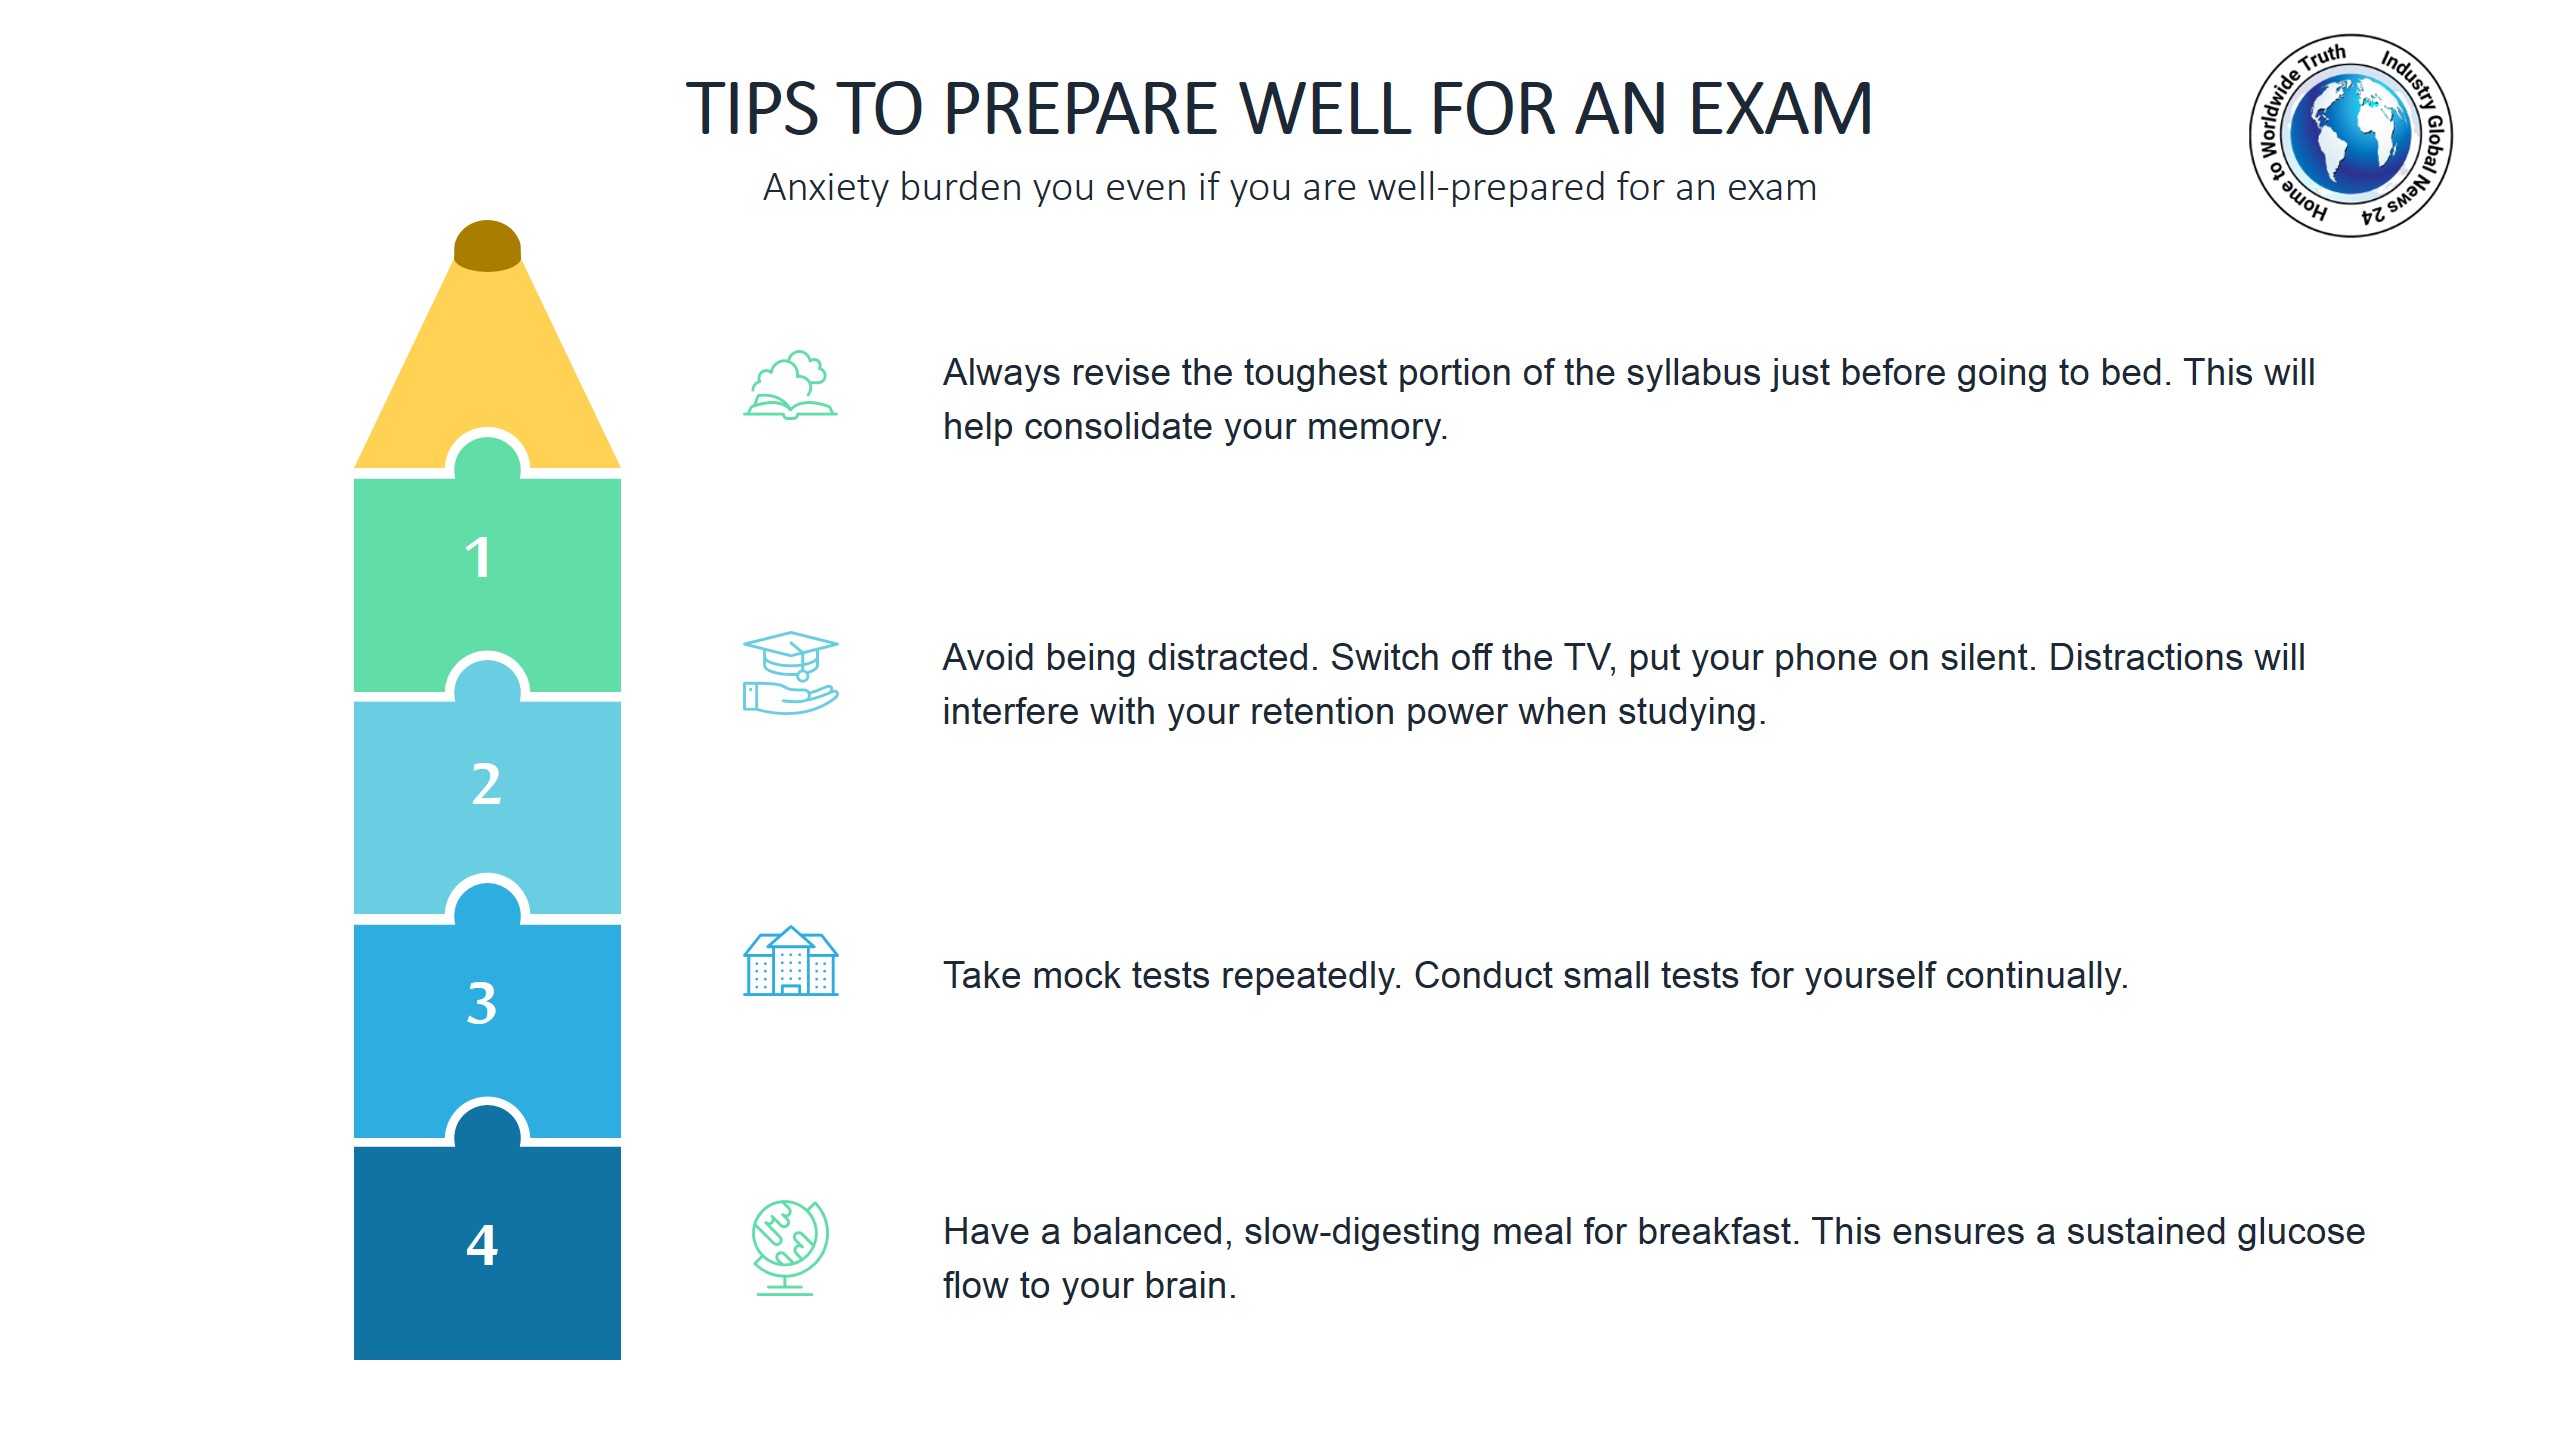 Tips to prepare well for an exam